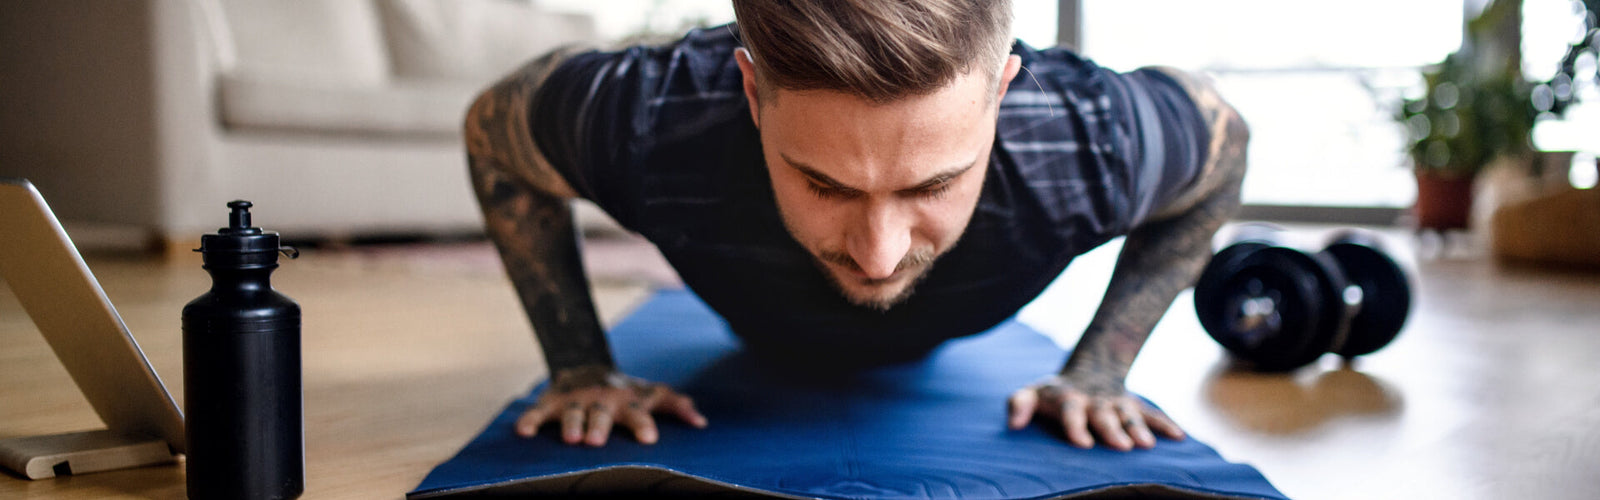 5 powerful strength-building exercises you can do at home right now